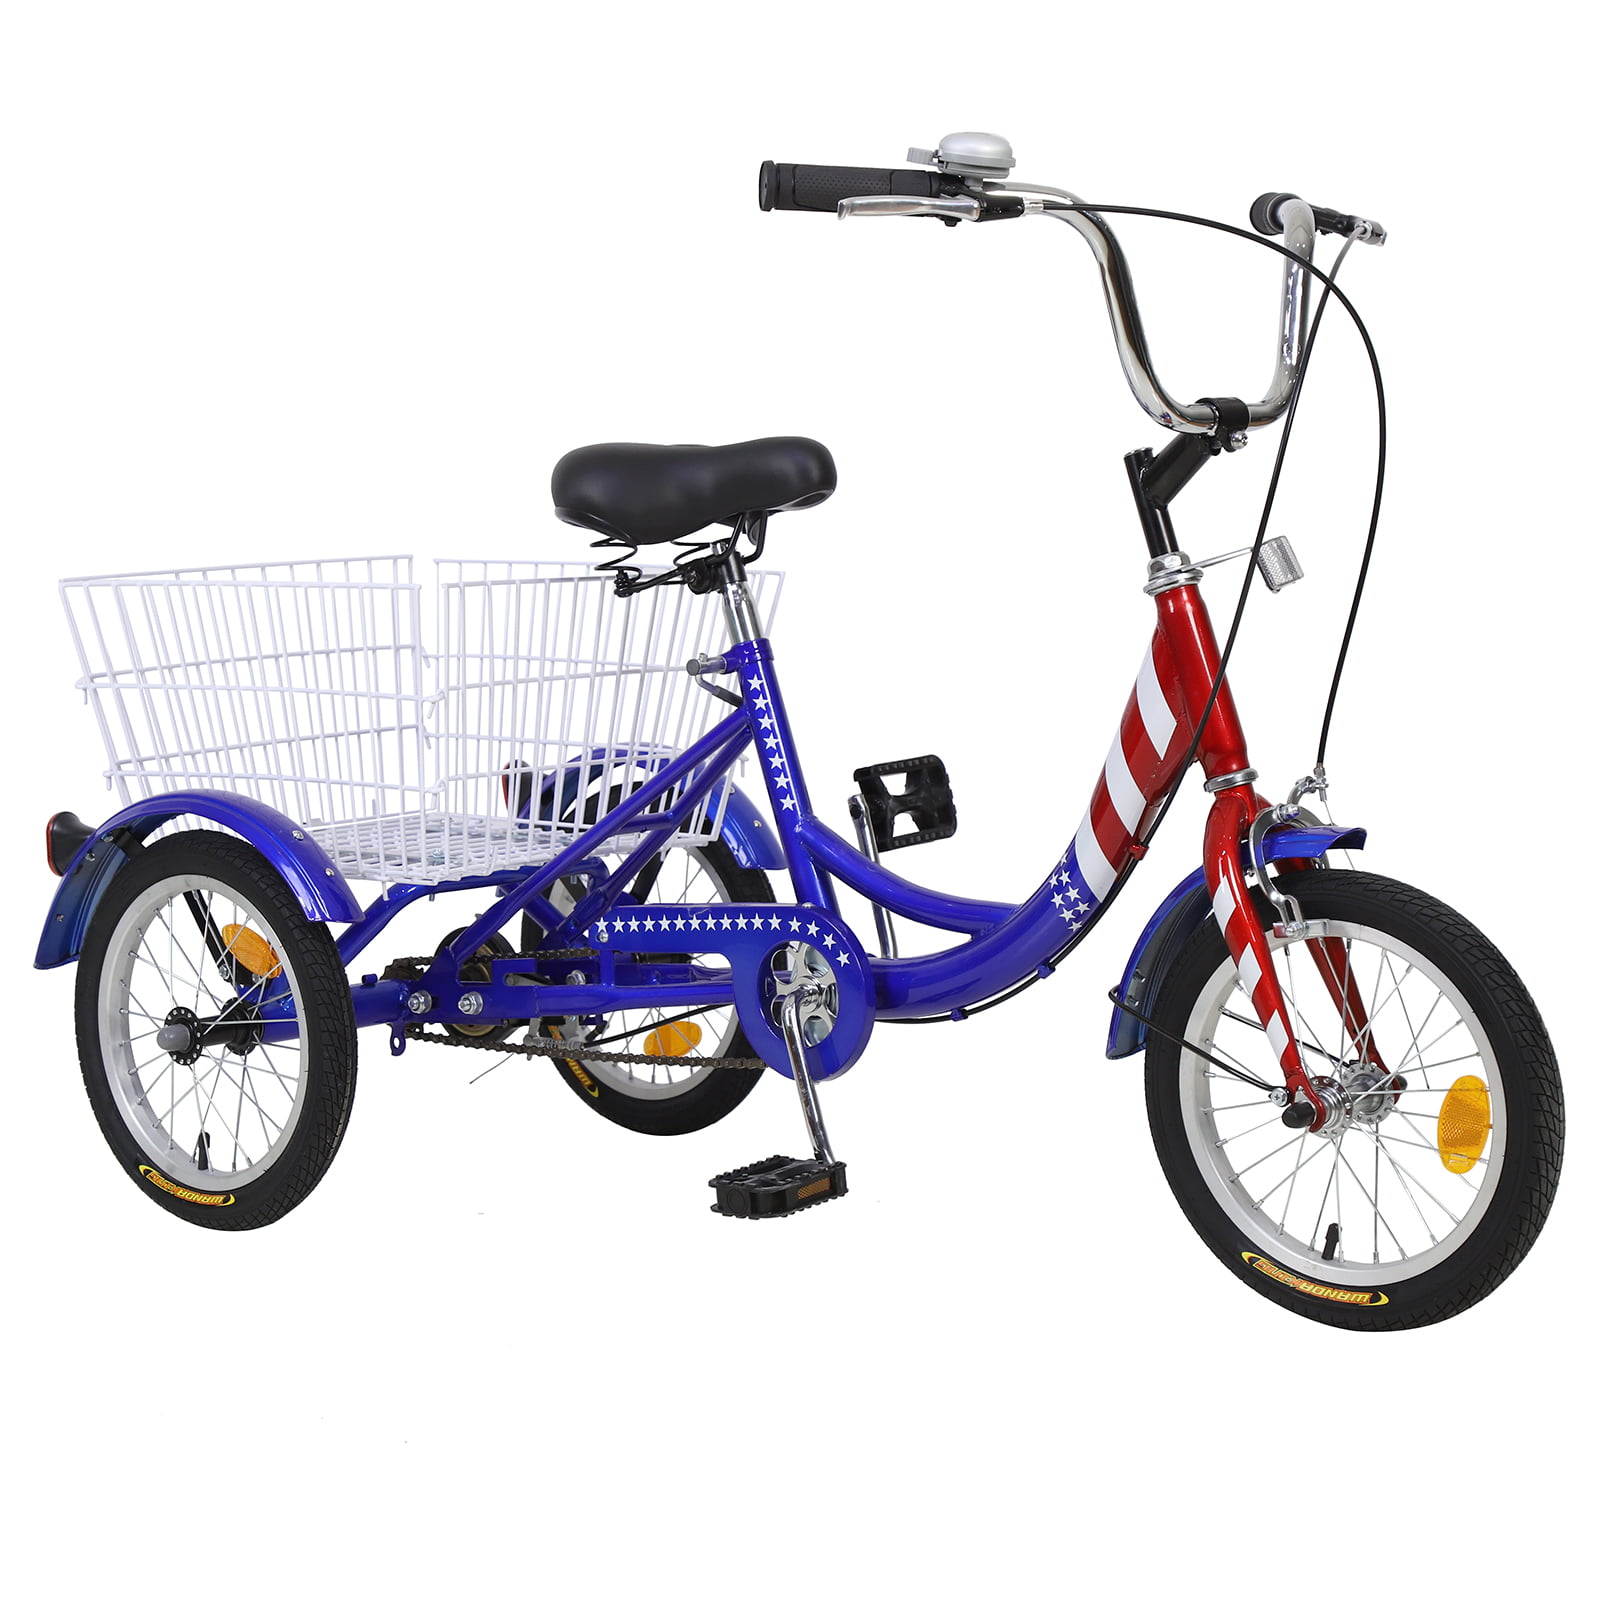 Teenager Tricycle 16'' 3 Wheel Bicycle Cruiser Bike with Basket Childs Kids Gift 